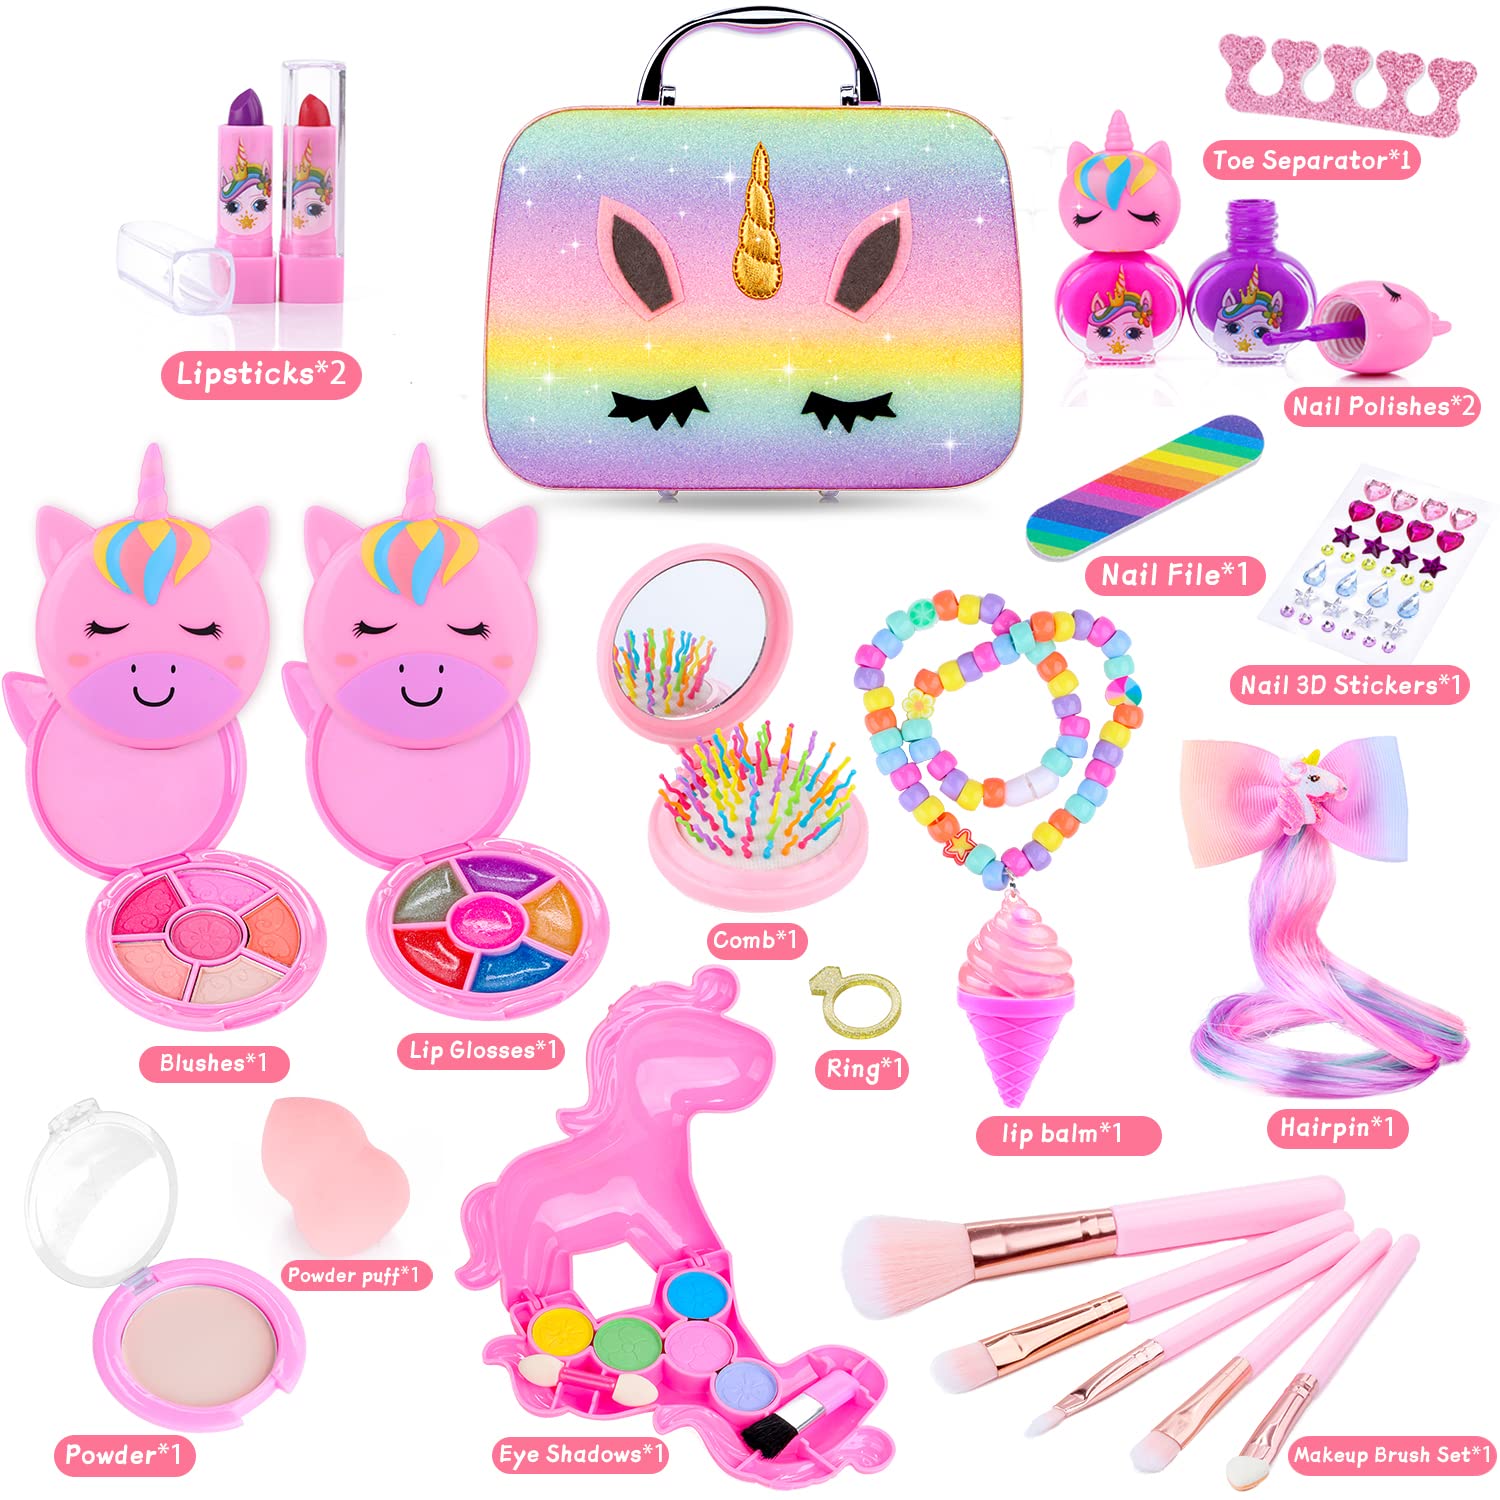 MagicToiee Brithday Gifts Unicorn Makeup Kit for Kids, Washable Cosmetic Set as Princess Birthday Gift Toy with Bag, Children Cosmetic Beauty Set for Girls Age 4 5 6 7 8 9 10 Year Old